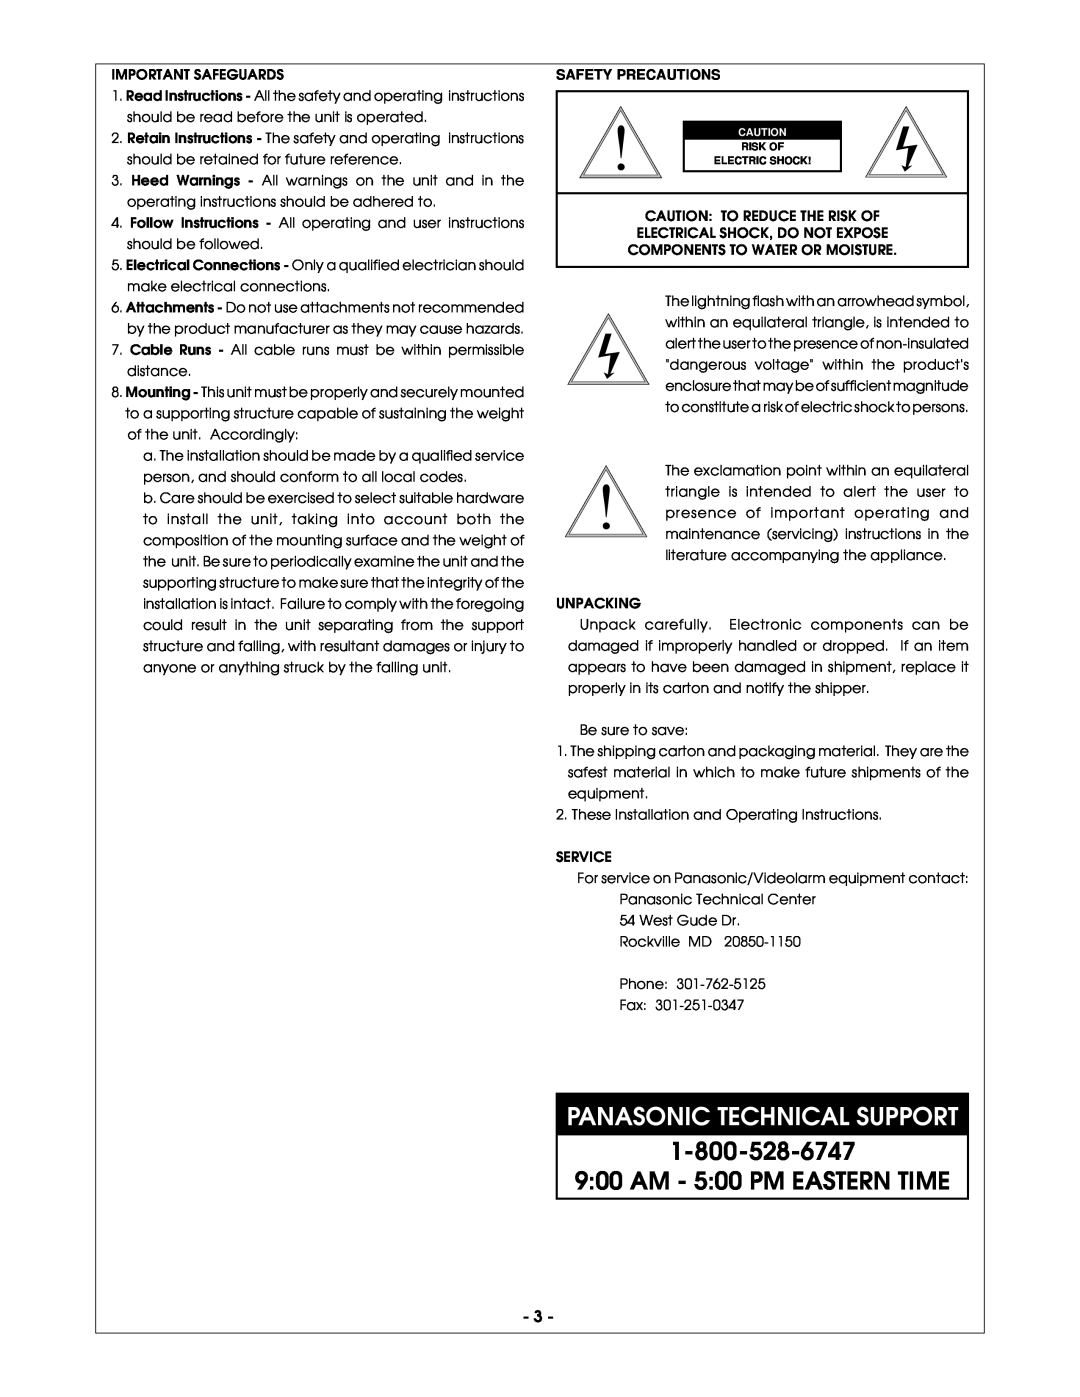 Panasonic PCF1, PCV1 manual Panasonic Technical Support, AM - 500 PM EASTERN TIME, Safety Precautions 